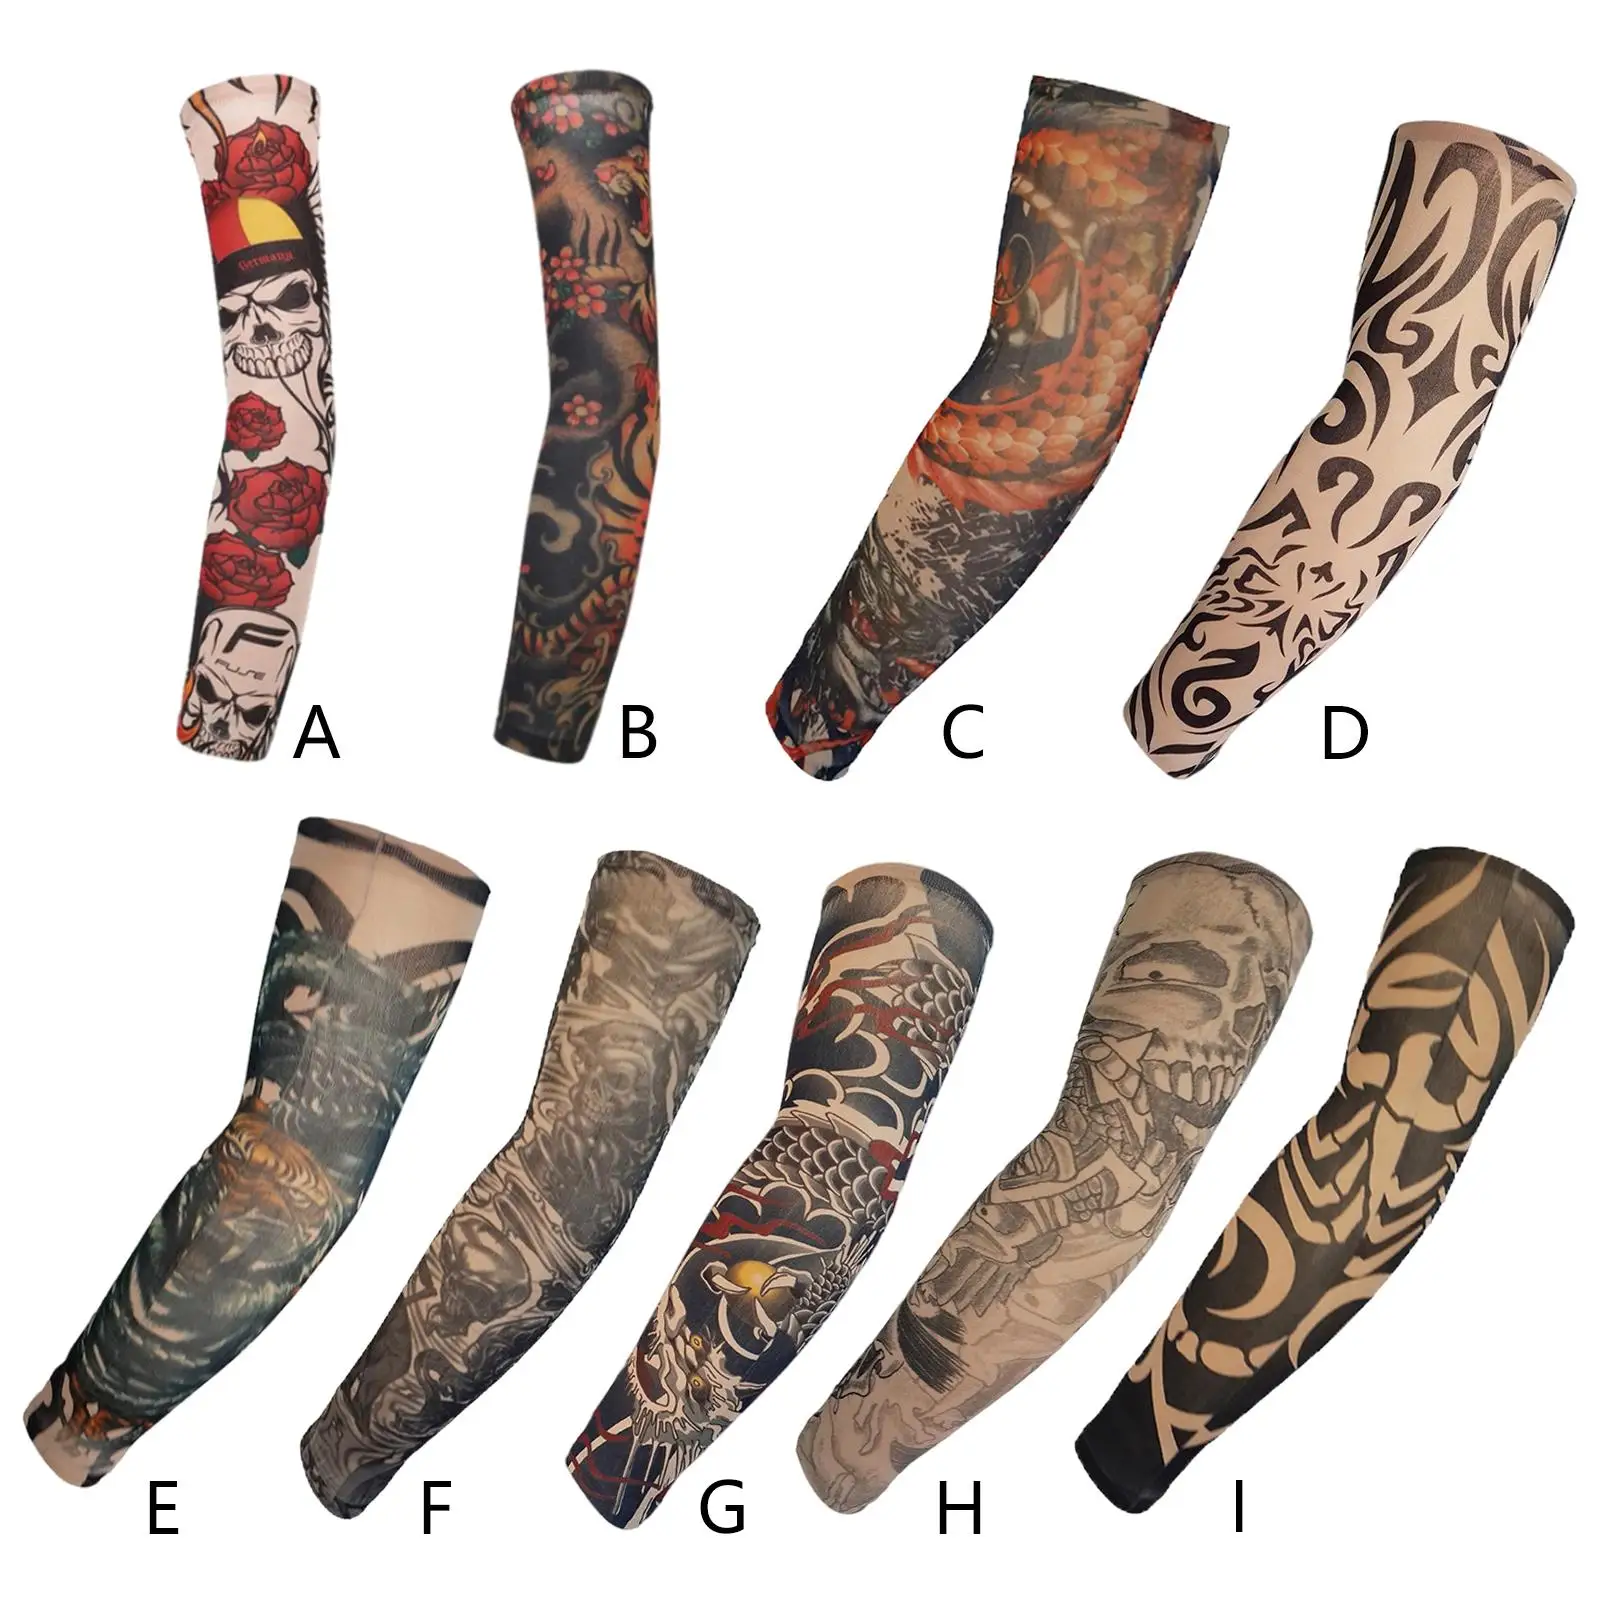 Tattoo Arm Sleeves Arm Cover Sun Protection for Running Men & Women Football